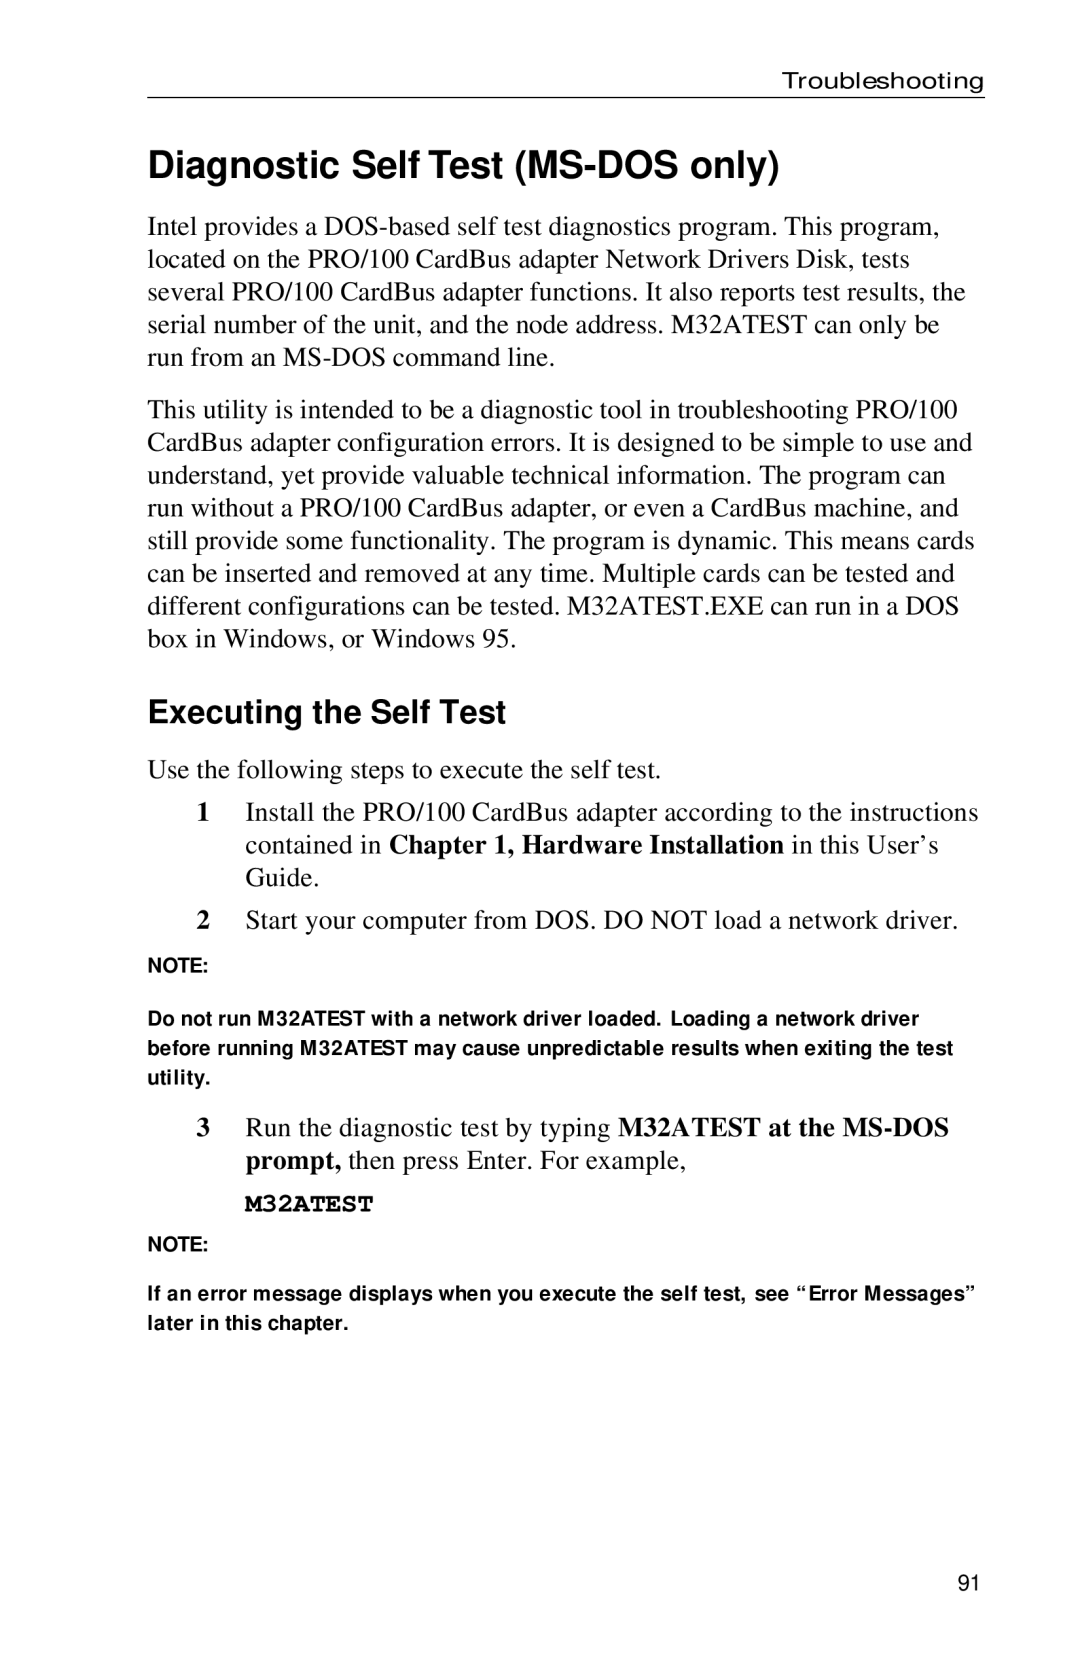 Intel PRO appendix Diagnostic Self Test MS-DOS only, Executing the Self Test 